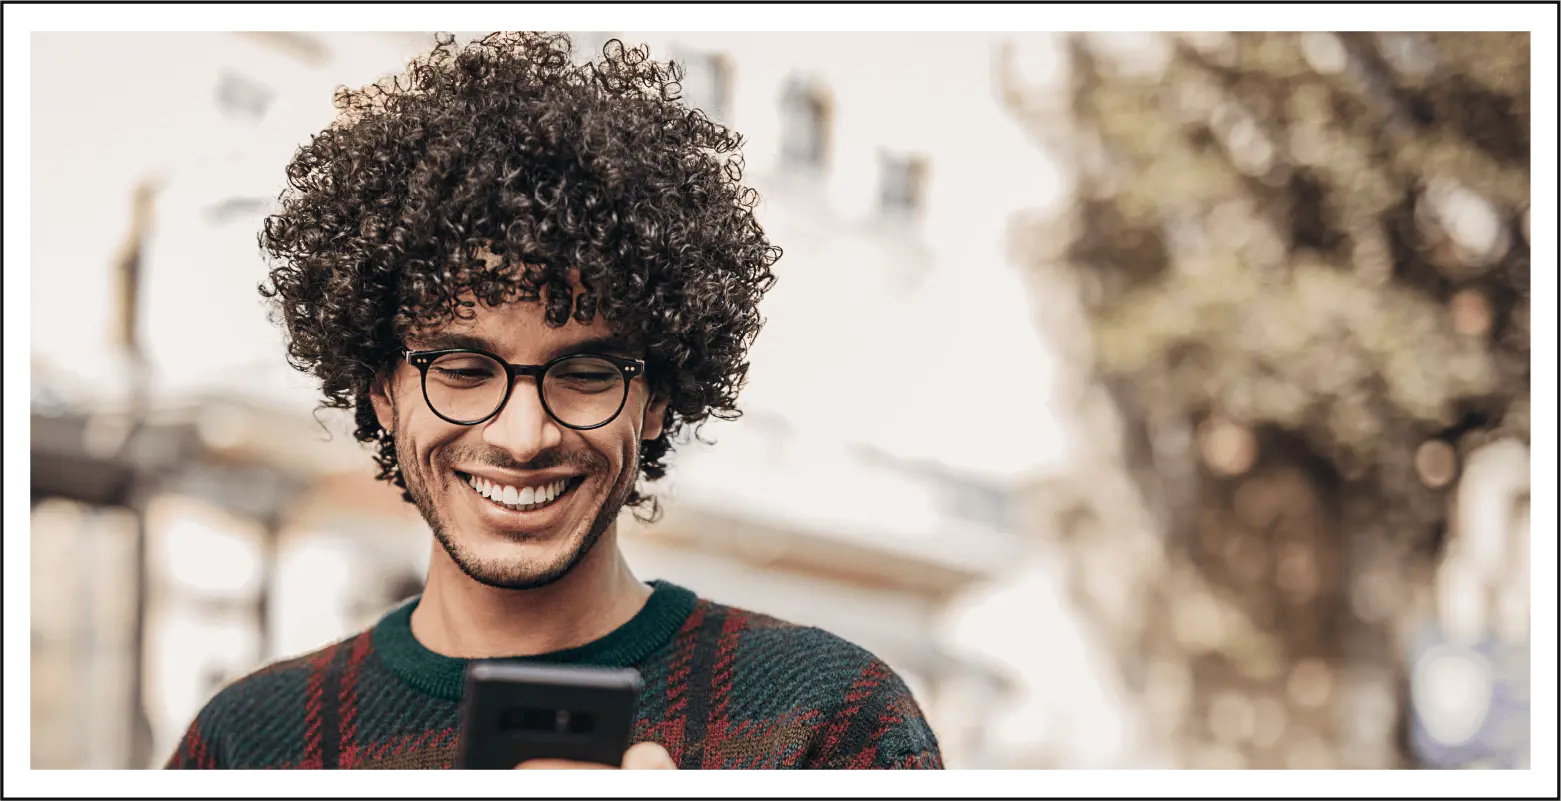 Man with defined curls smiling down at phone.